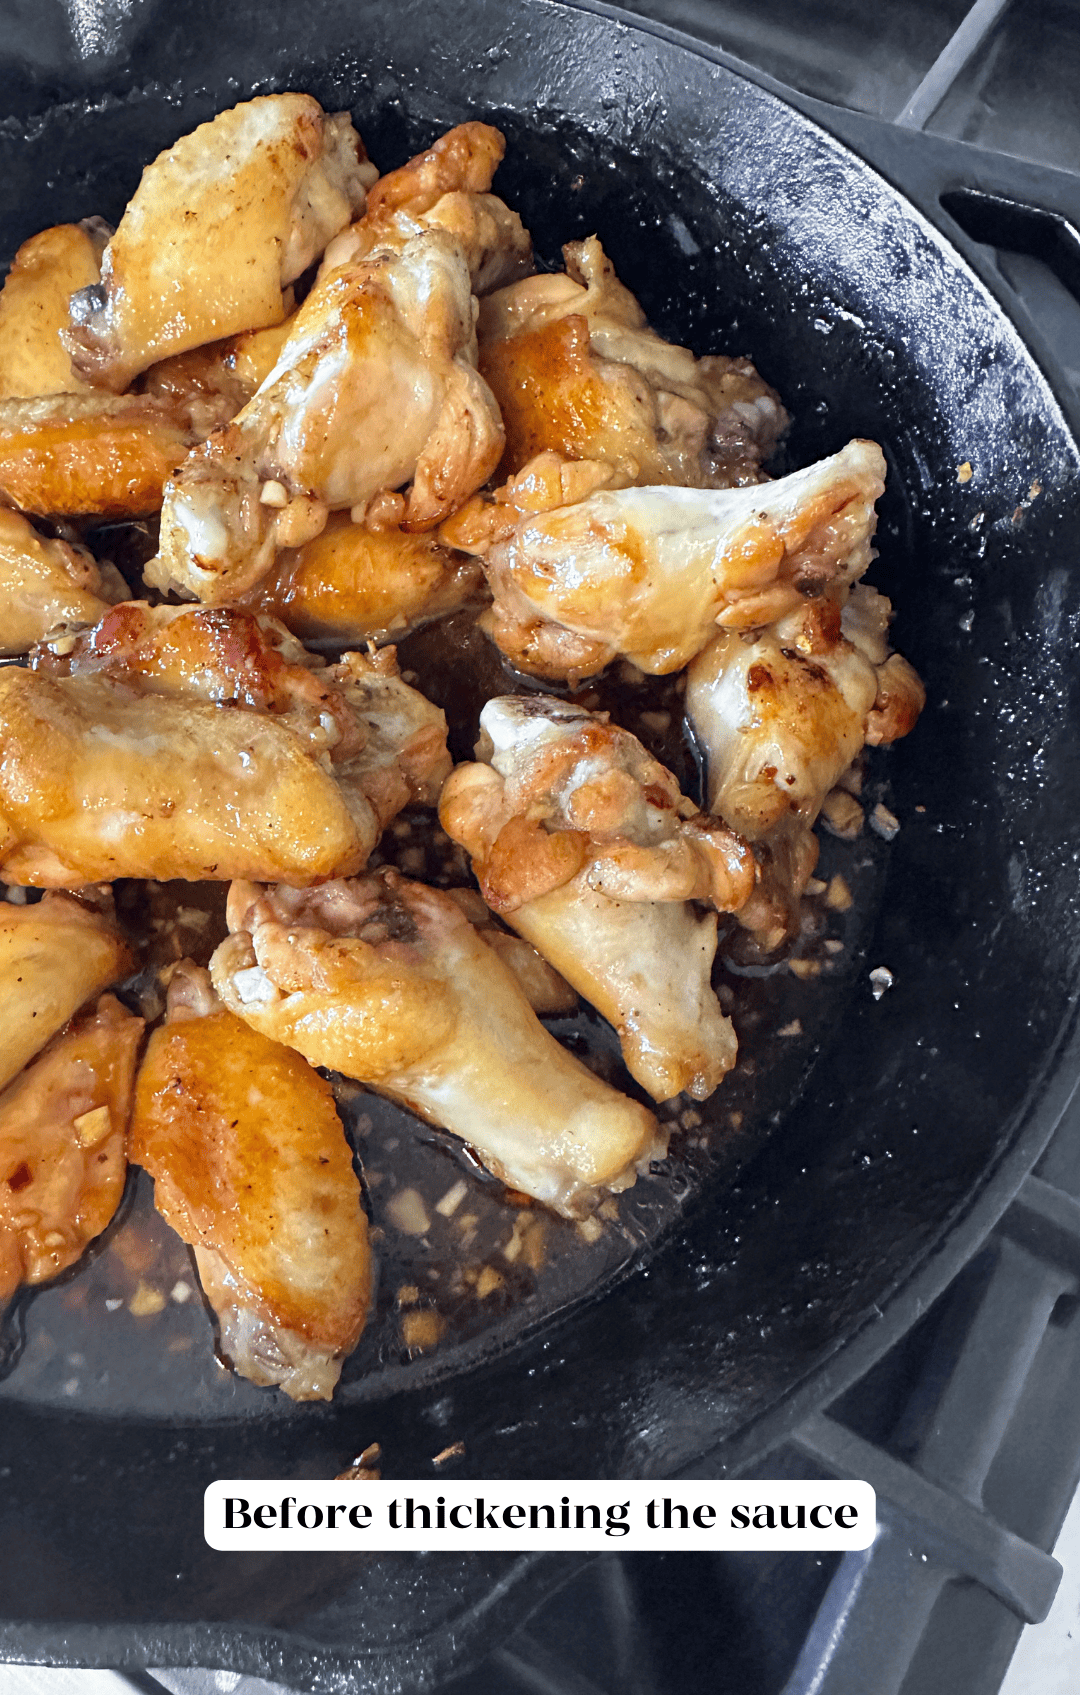 Plain wings piled in a pan with sauce.